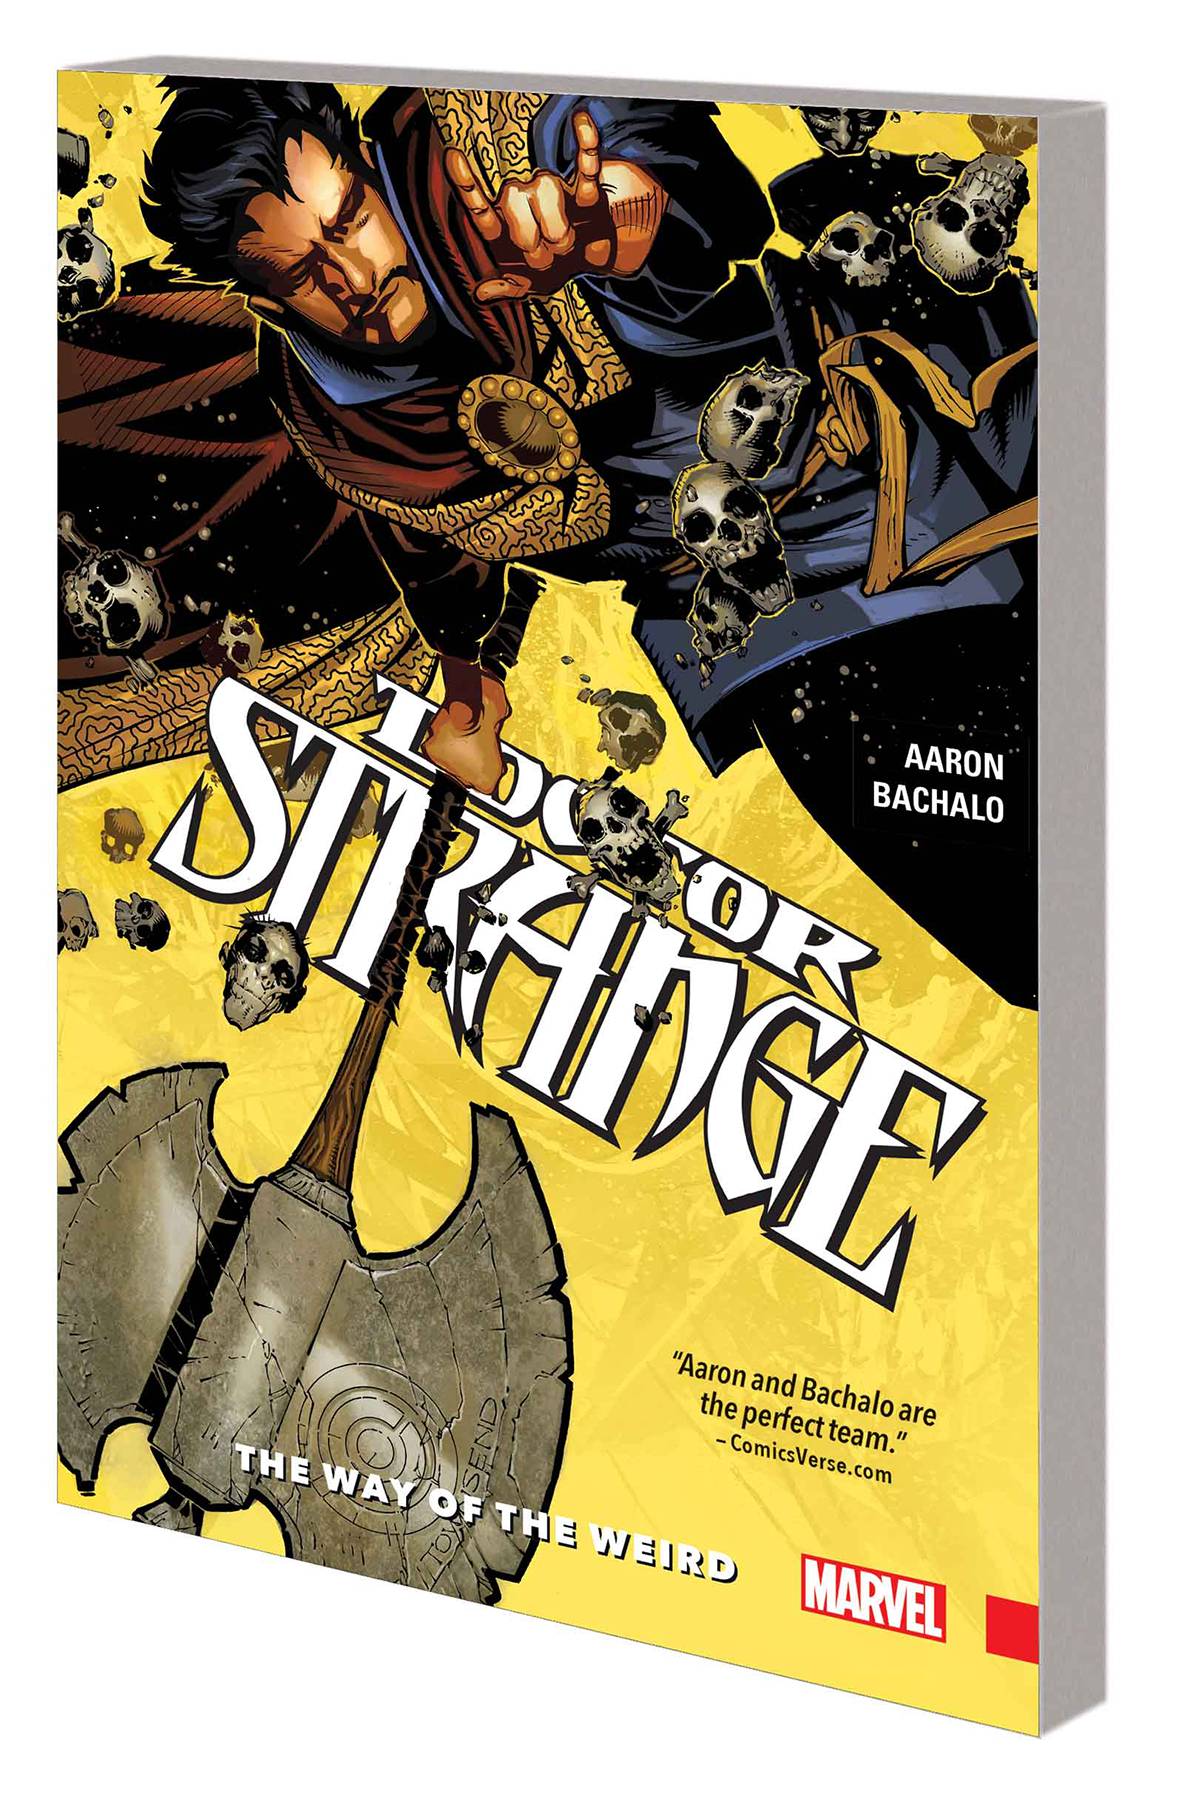 DOCTOR STRANGE VOL 01: THE WAY OF THE WEIRD